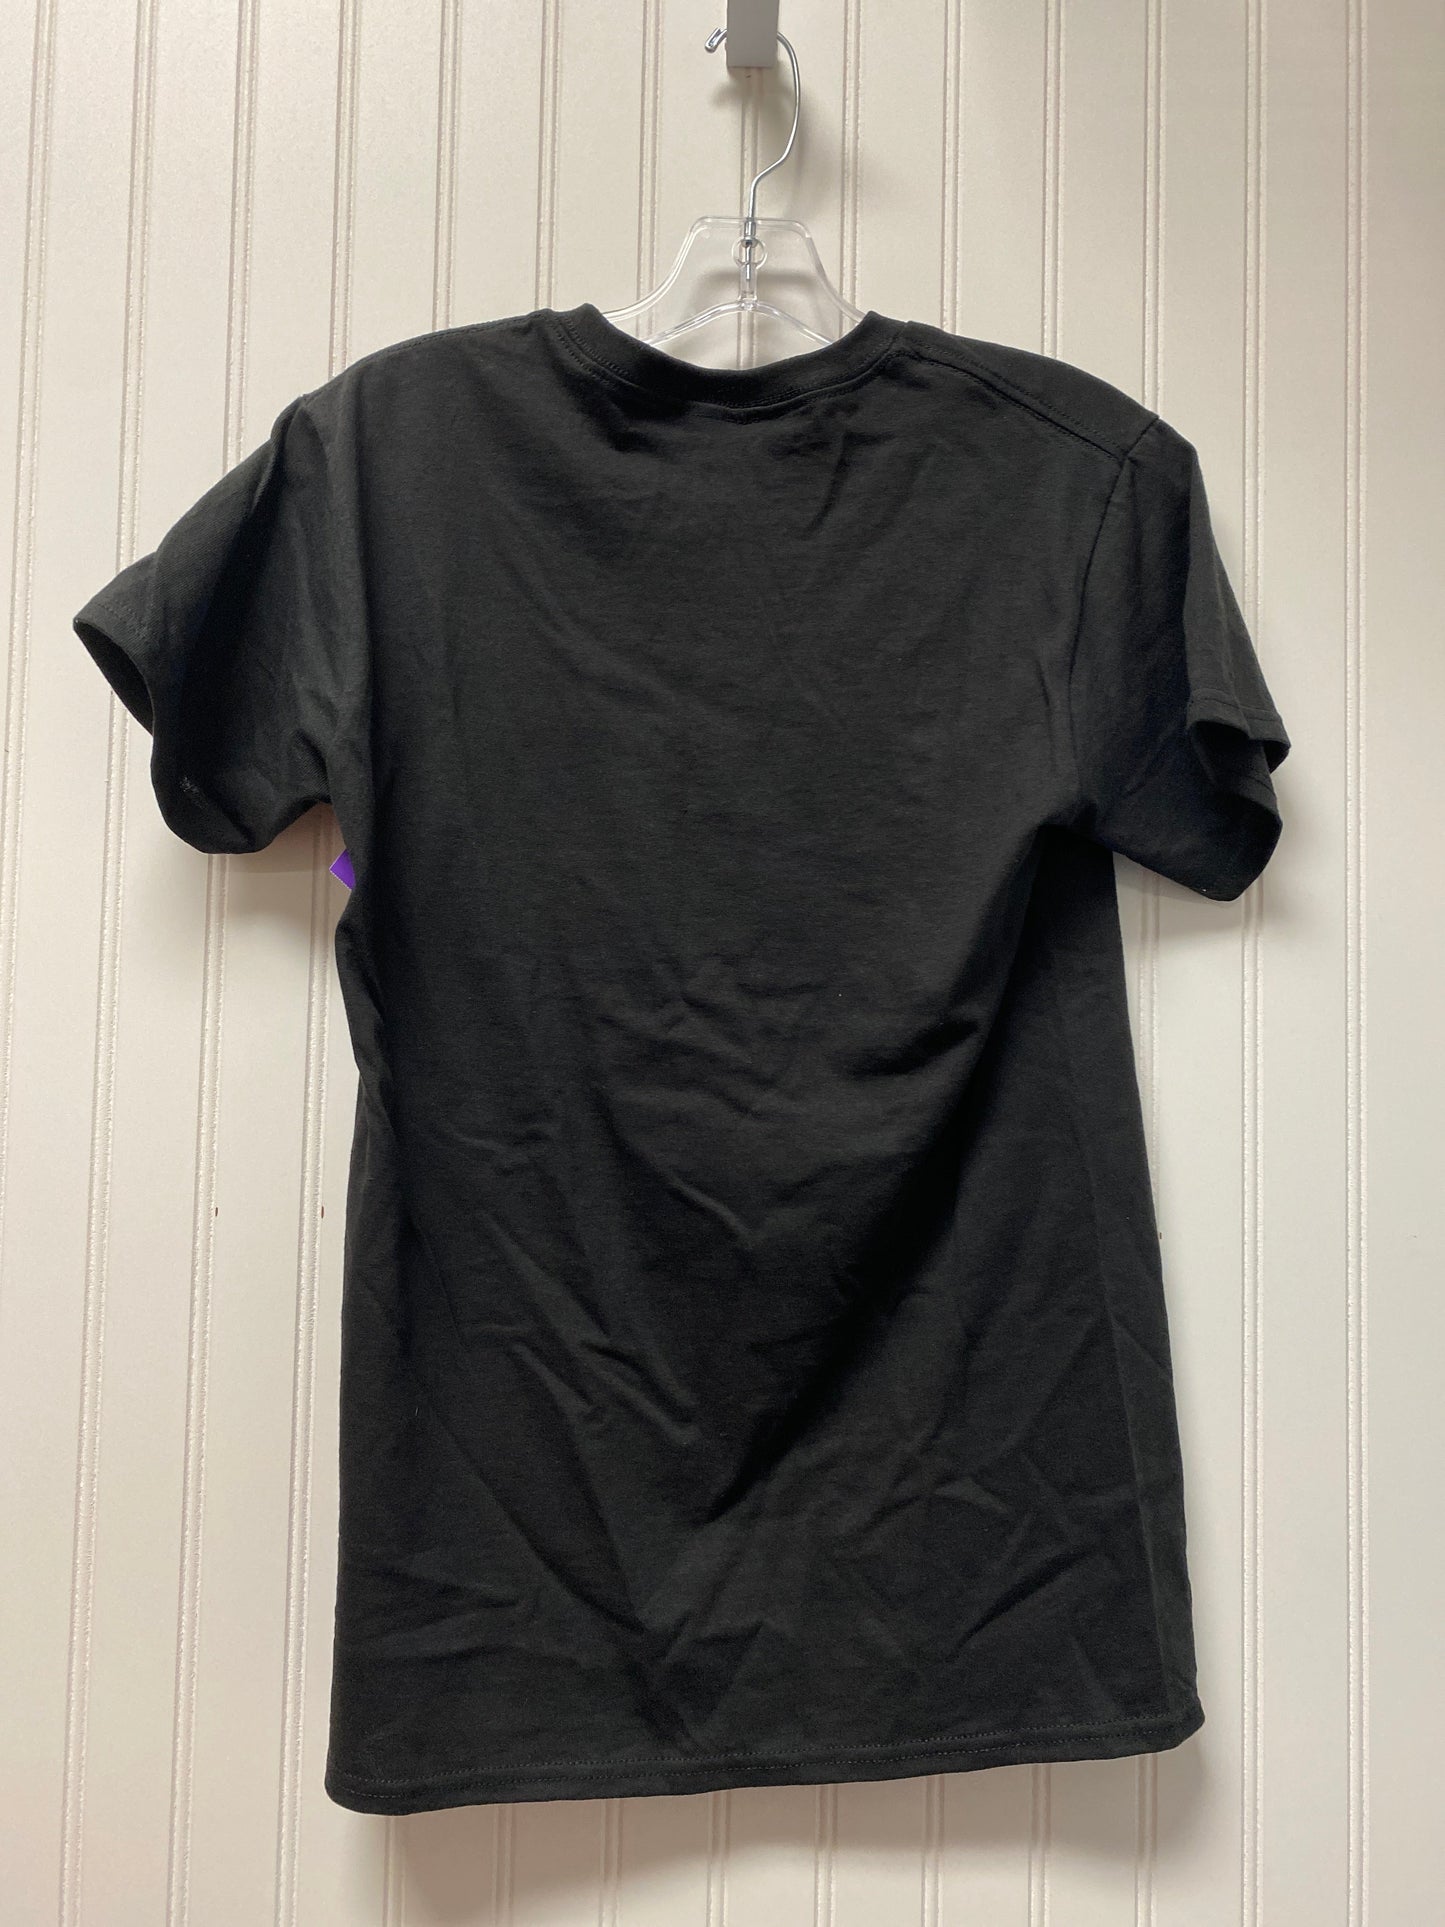 Black Top Short Sleeve Clothes Mentor, Size S